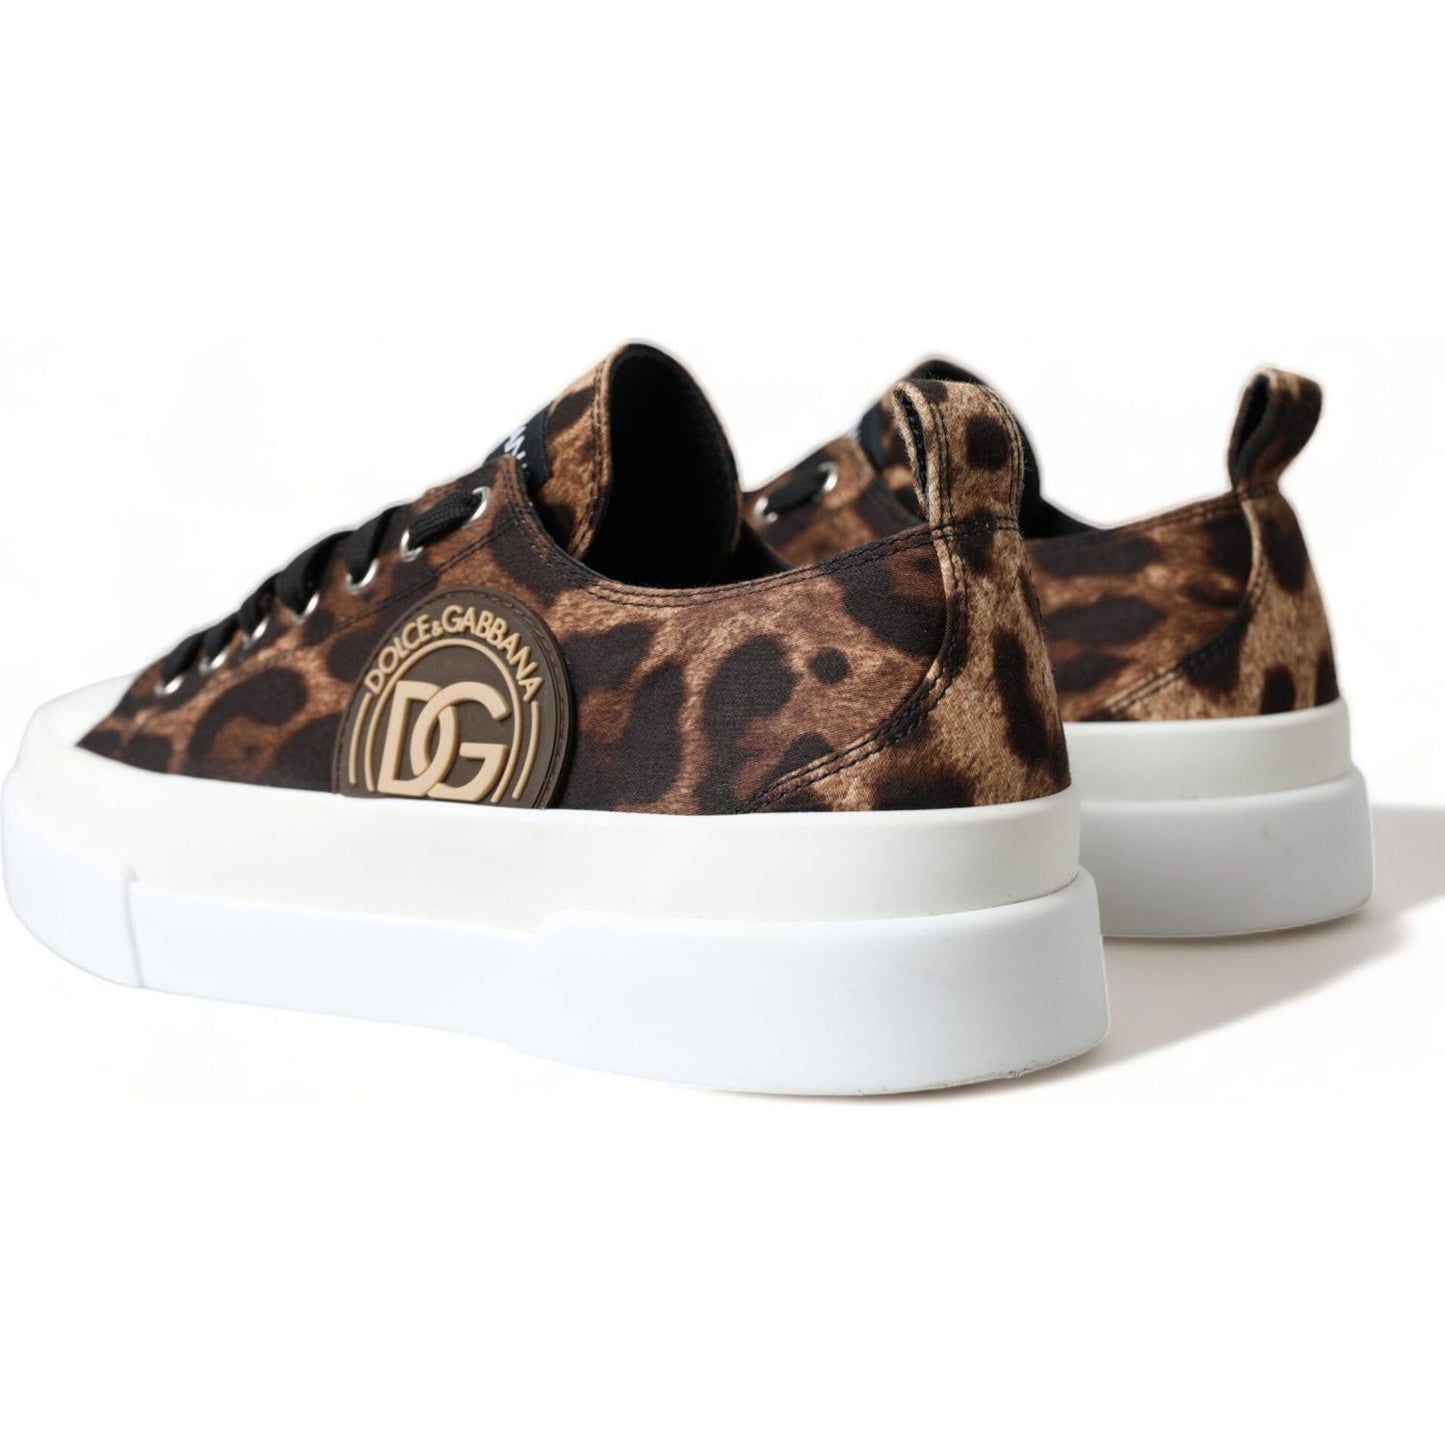 Dolce & Gabbana Elegant Leopard Print Casual Sneakers brown-leopard-canvas-sneakers-shoes